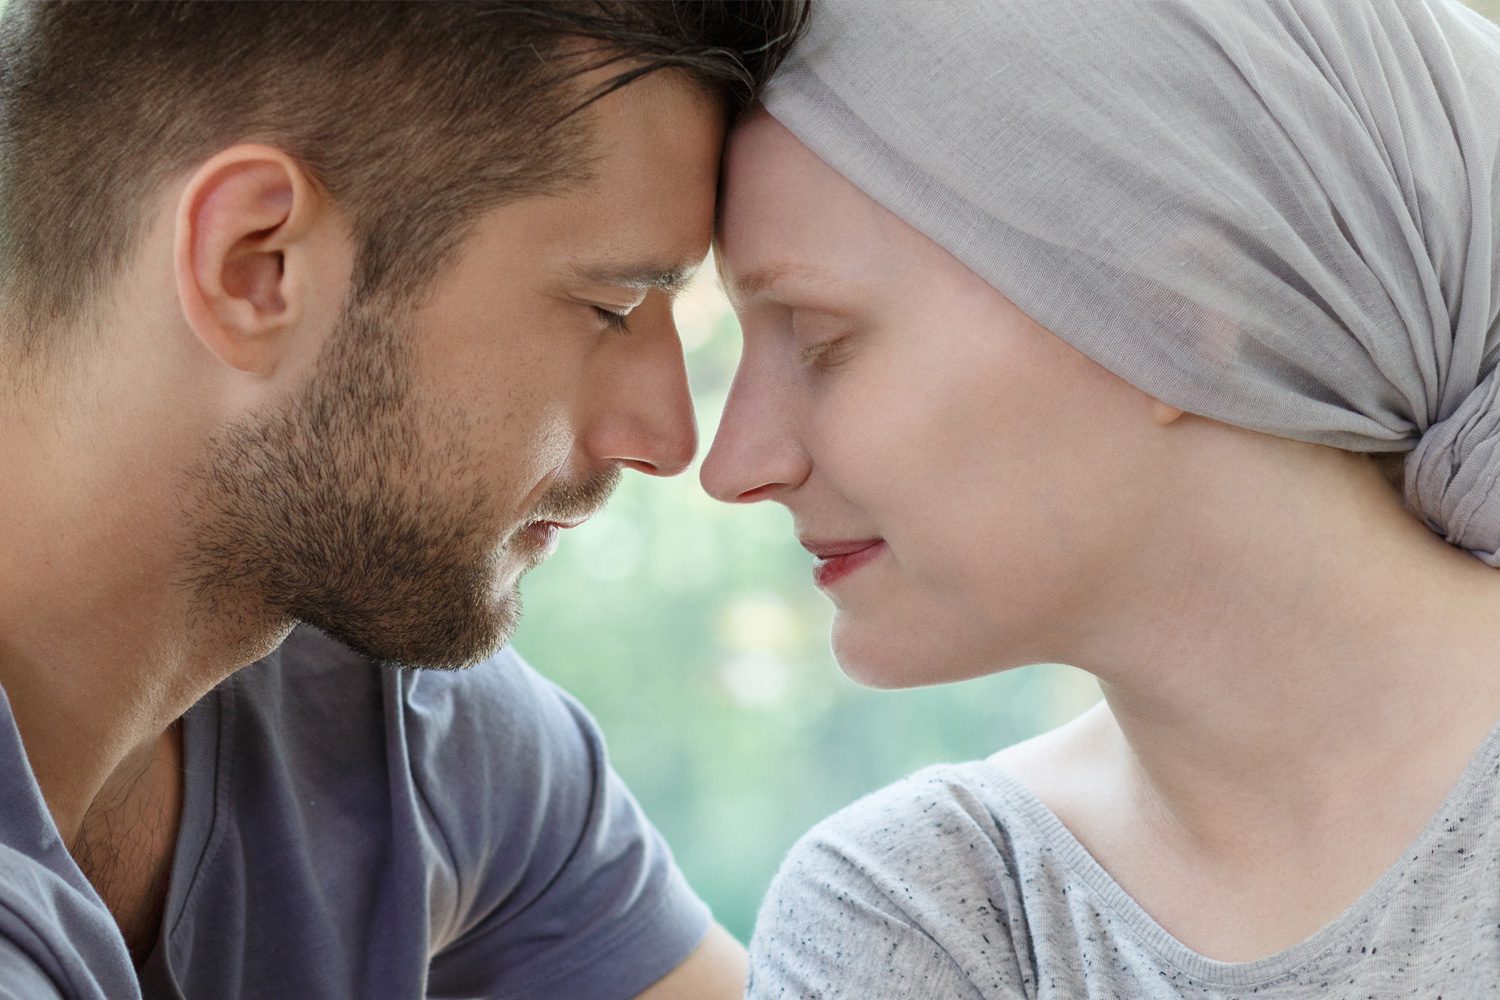 Couple After Chemo Treatment